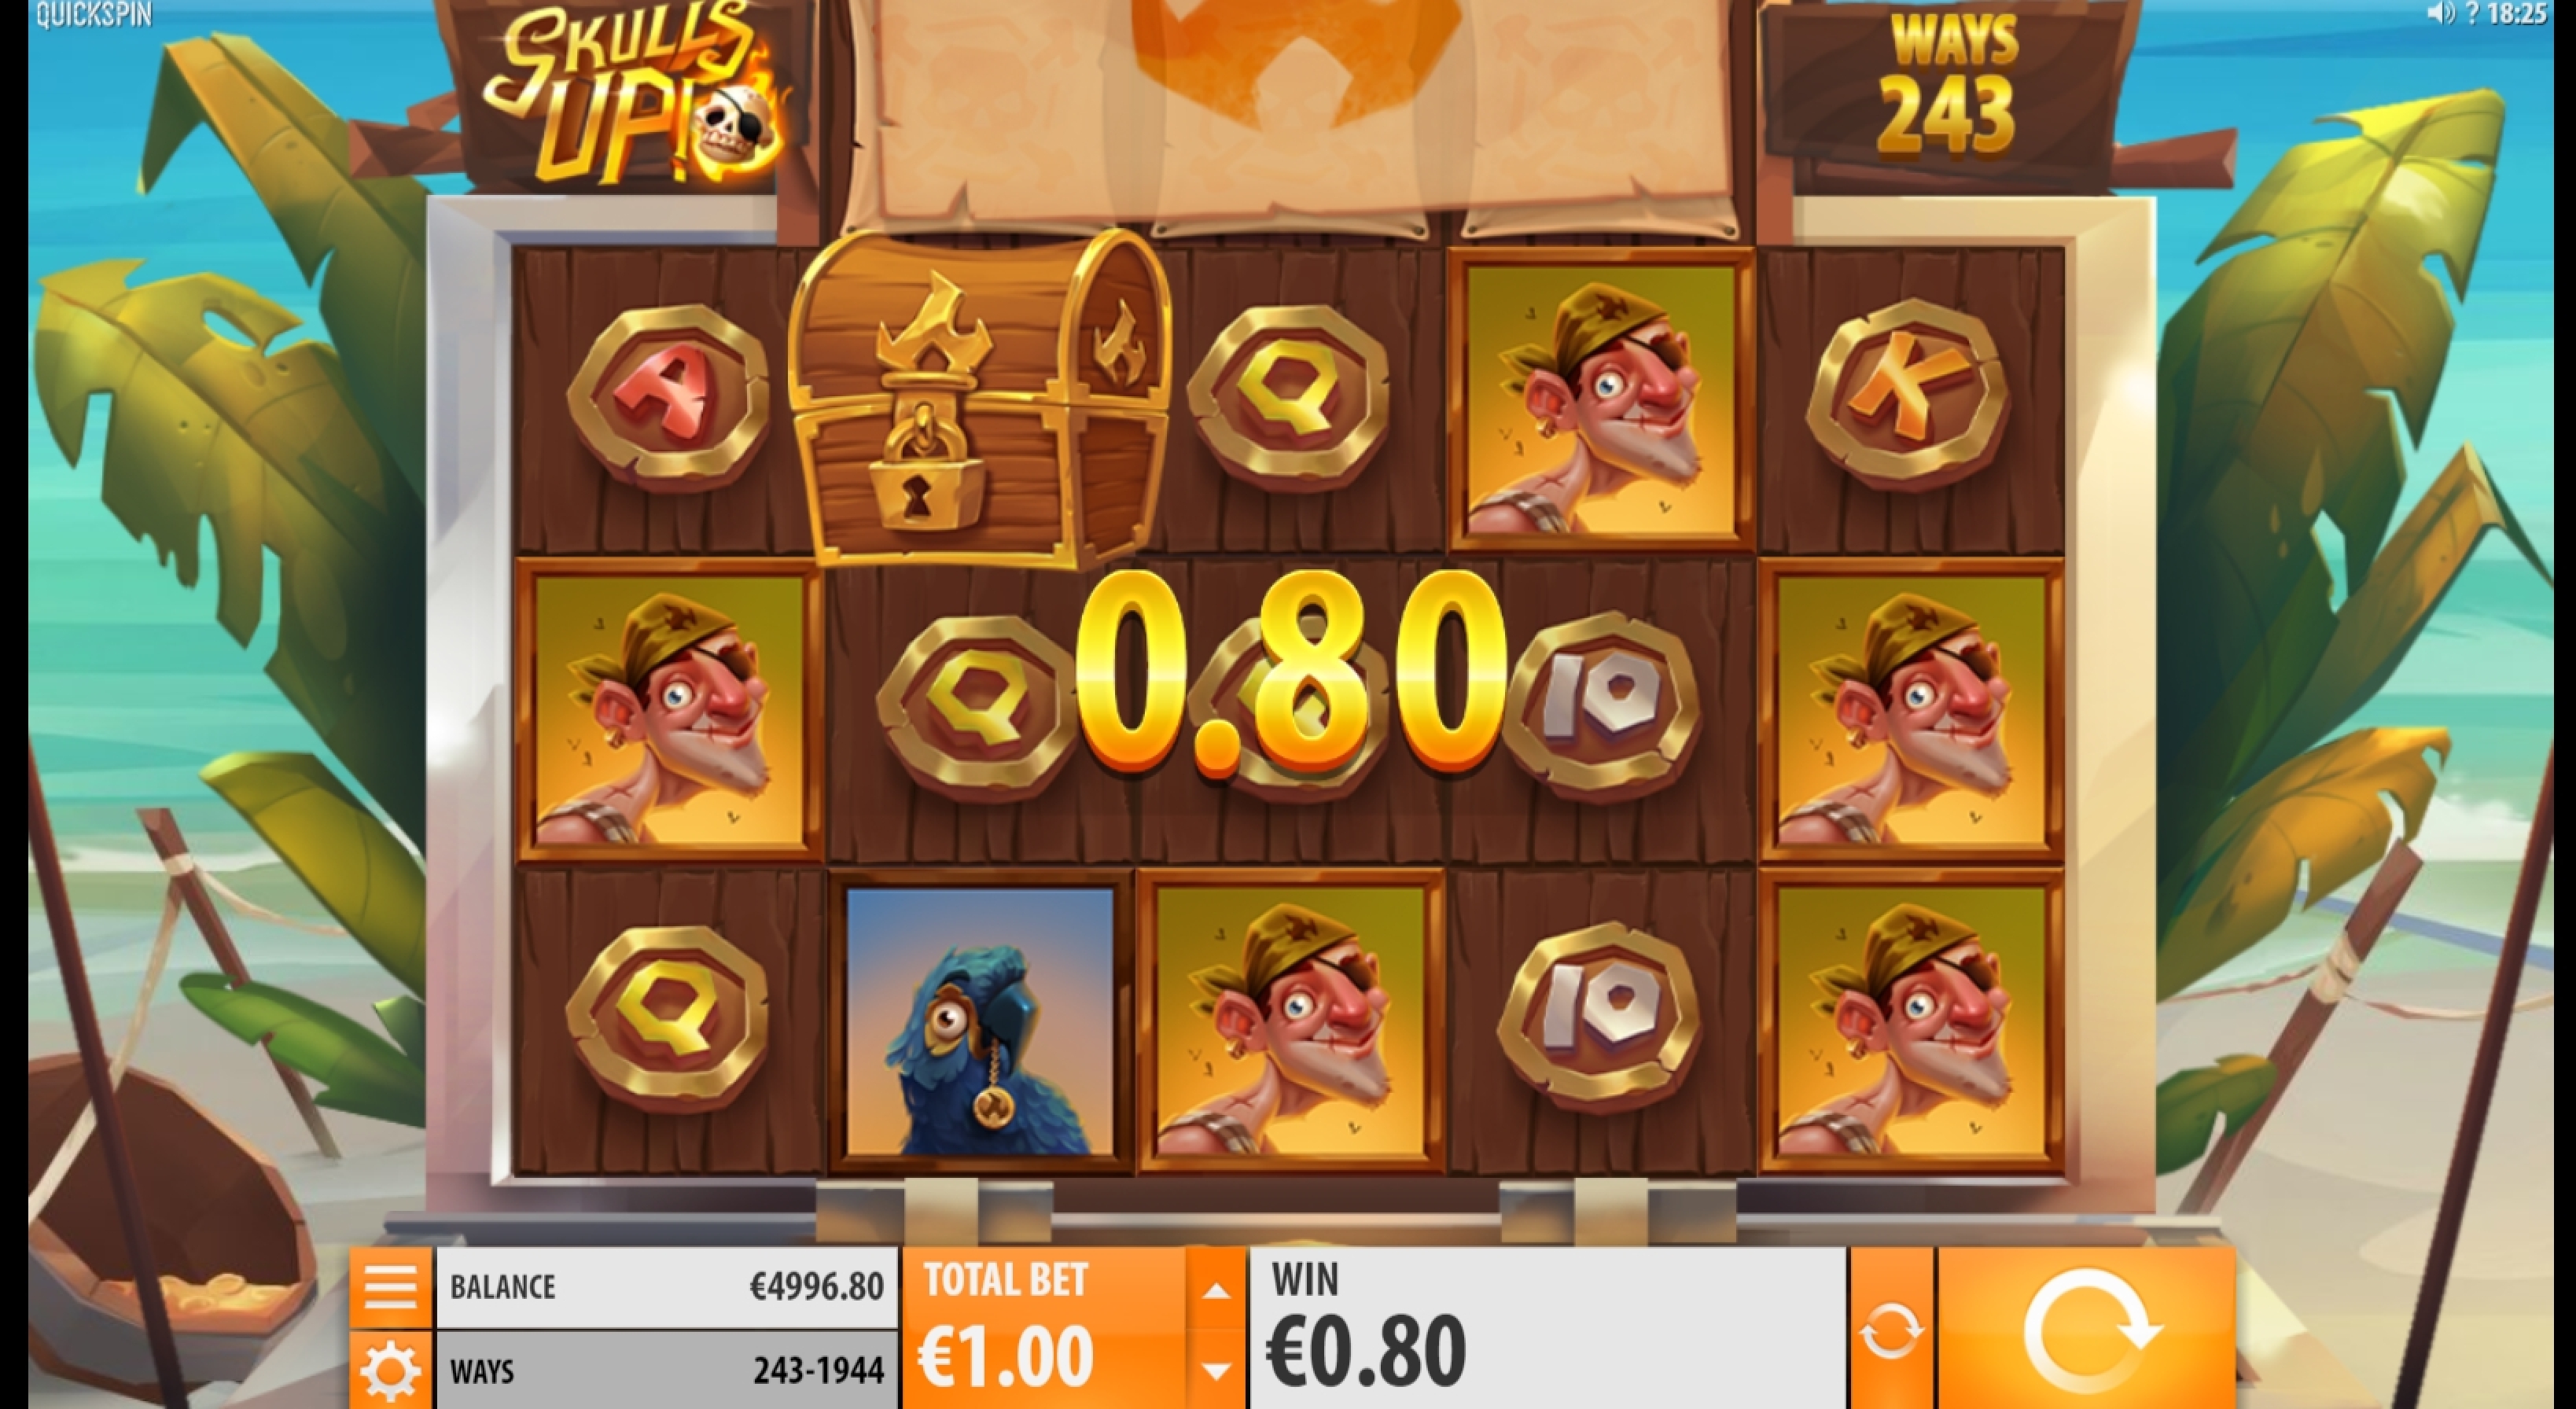 Win Money in Skulls UP! Free Slot Game by Quickspin